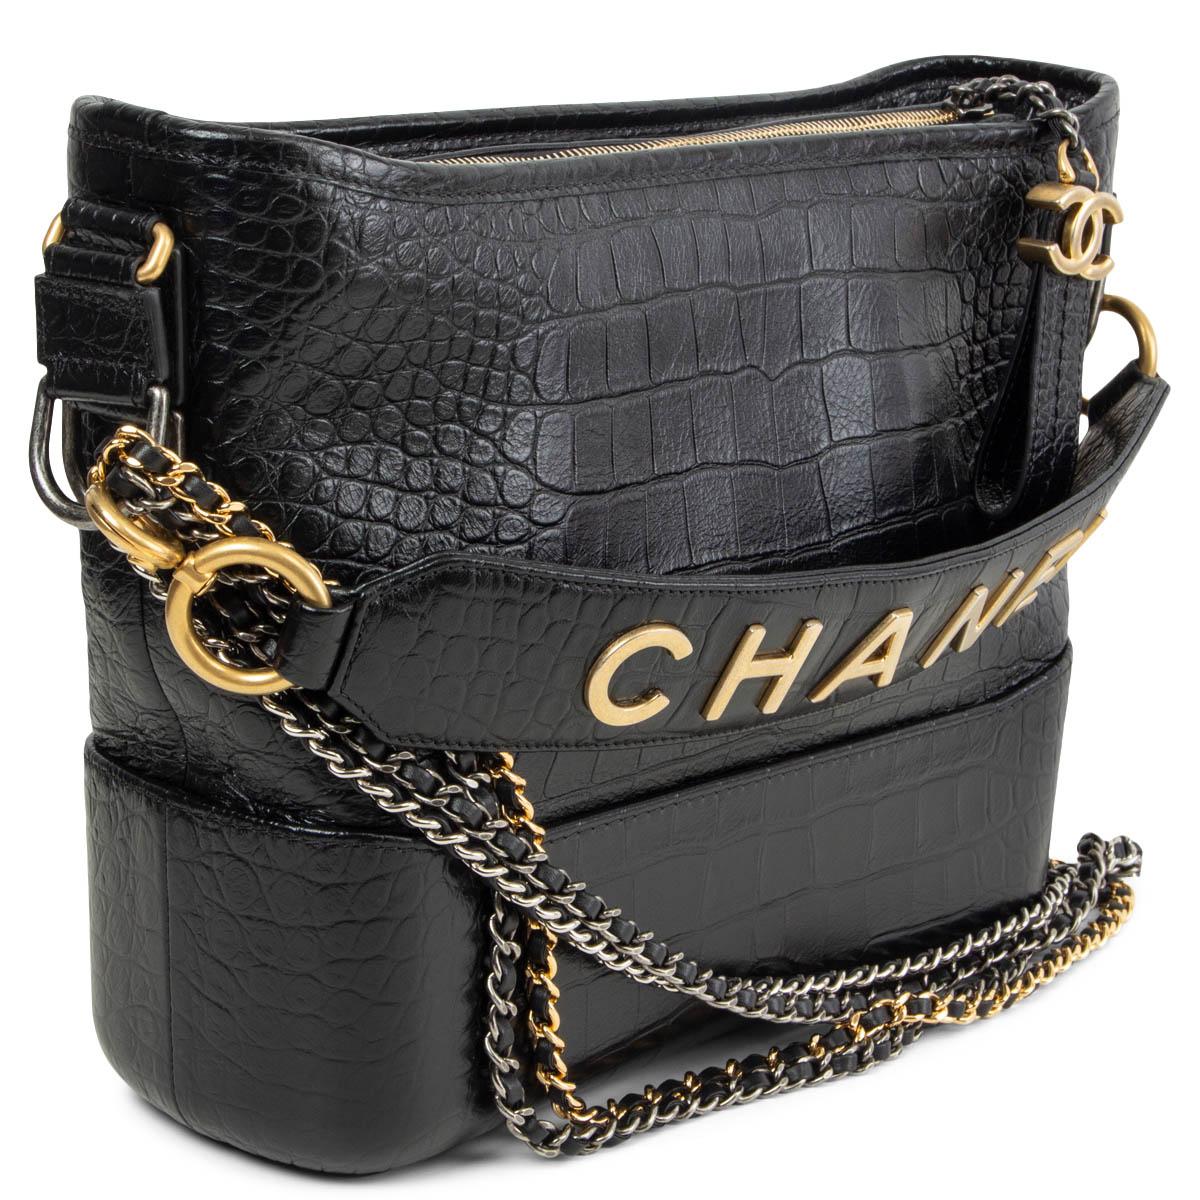 100% authentic Chanel Gabrielle Medium hobo bag in black croco embossed calfskin. Double chain shoulder-strap in gold-tone, silver-tone & ruthenium-finish metal. Opens with a CC zipper on top and is lined in black grosgrain fabric with one zipper